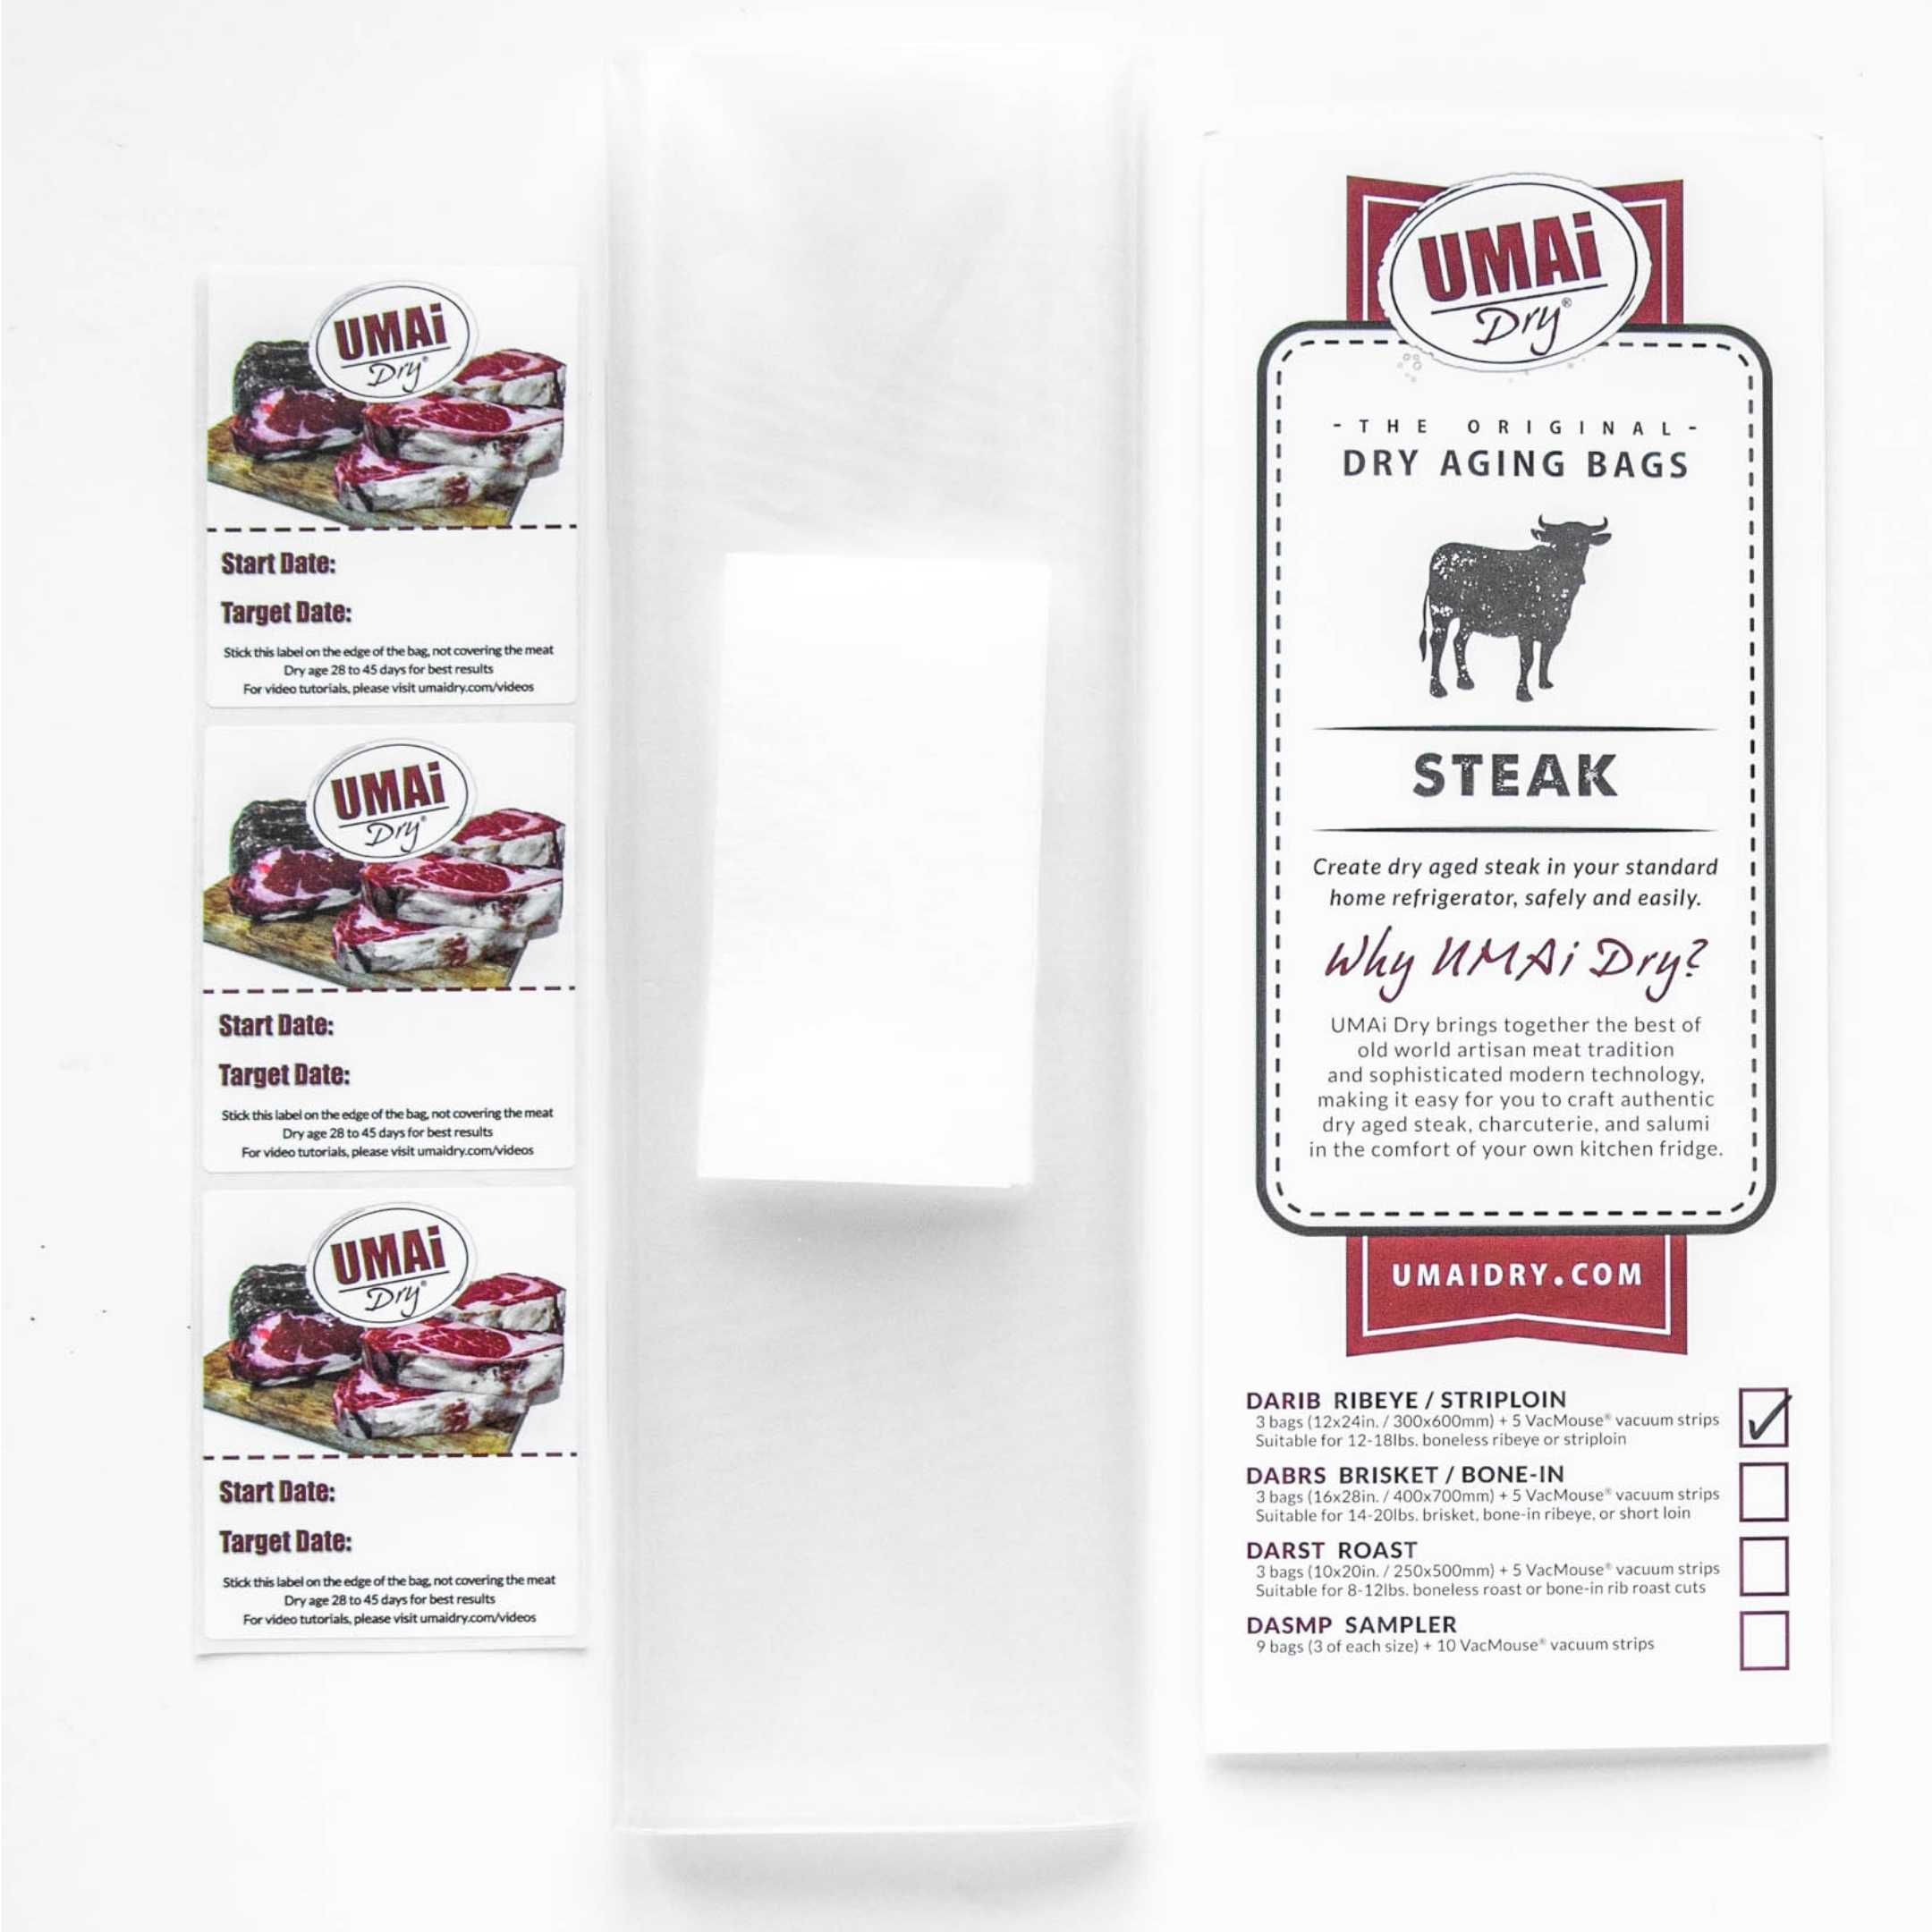 UMAi Dry Aging Bag for Steaks - Pack of 3 I Dry Age Bags for Meat, Ribeye &  Striploin Steak up to 12-18lbs, Home Steak Ager Refrigerator Bags, NO